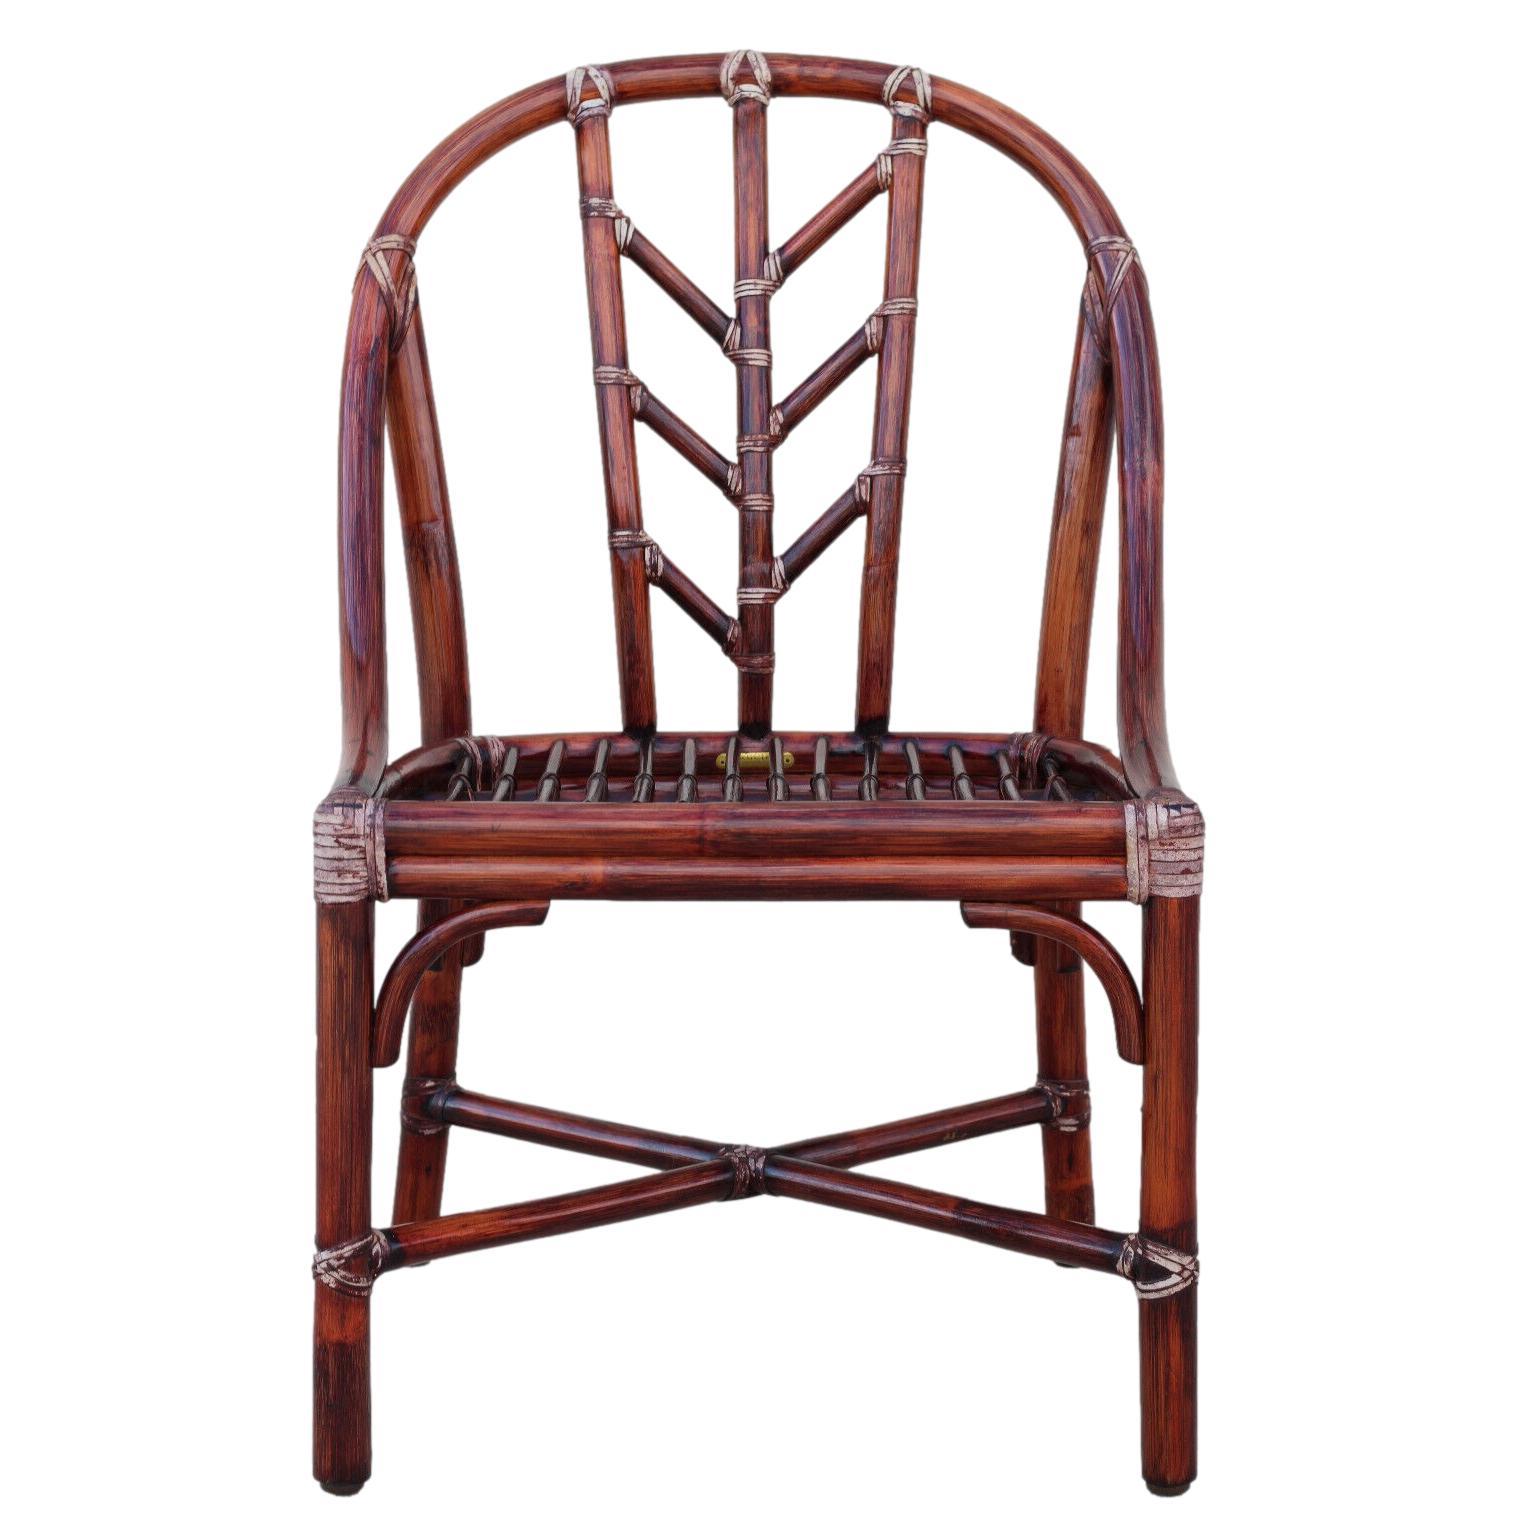 Hand-Crafted Elinor McGuire for McGuire San Francisco Rattan Dining Chairs, a Pair For Sale